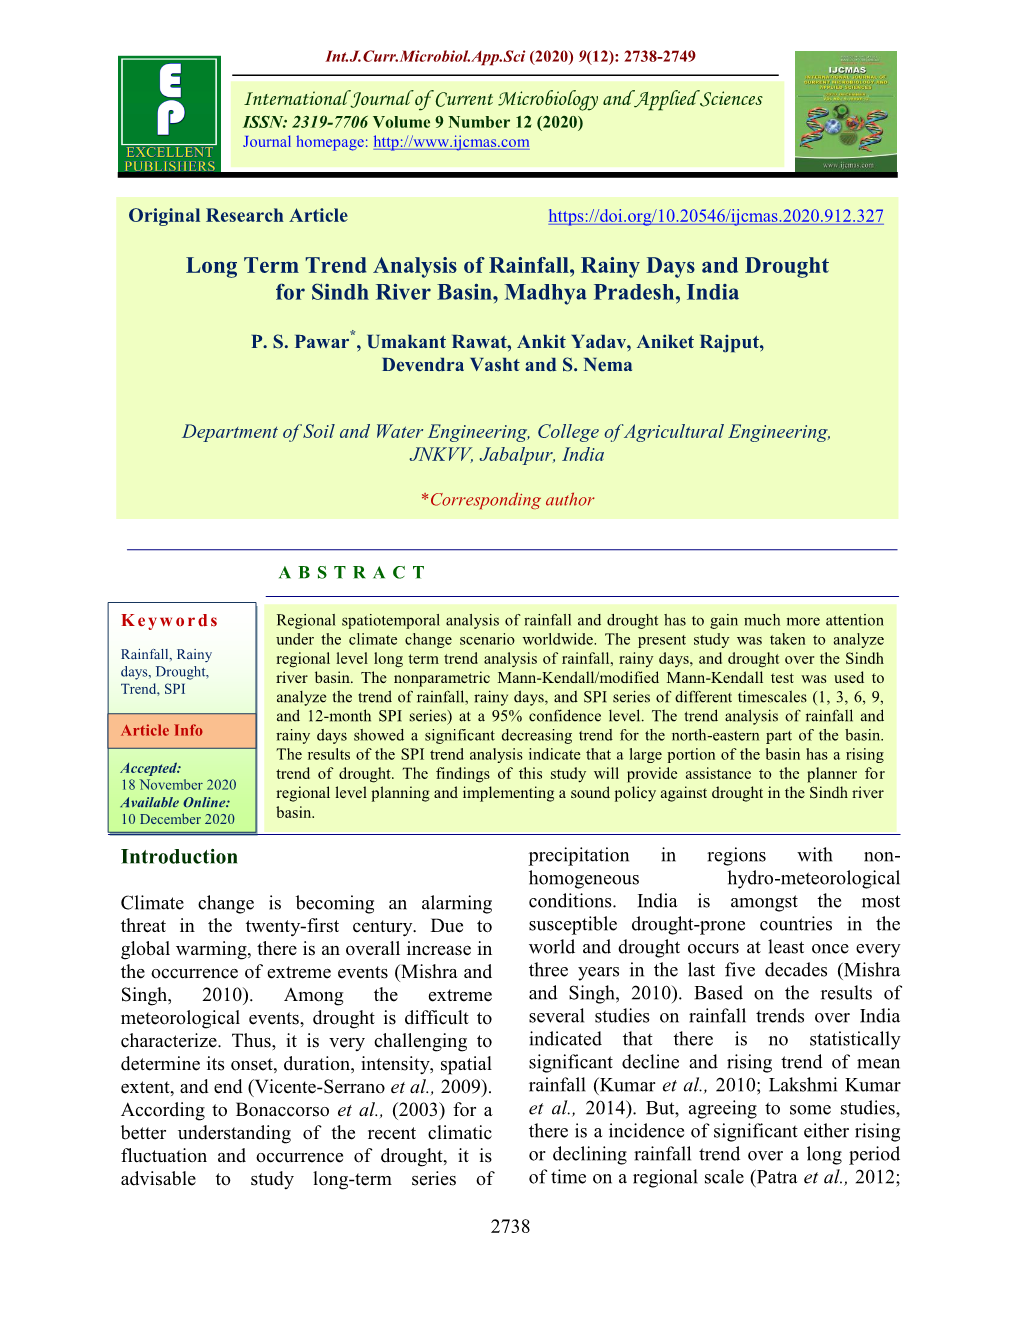 Long Term Trend Analysis of Rainfall, Rainy Days and Drought for Sindh River Basin, Madhya Pradesh, India